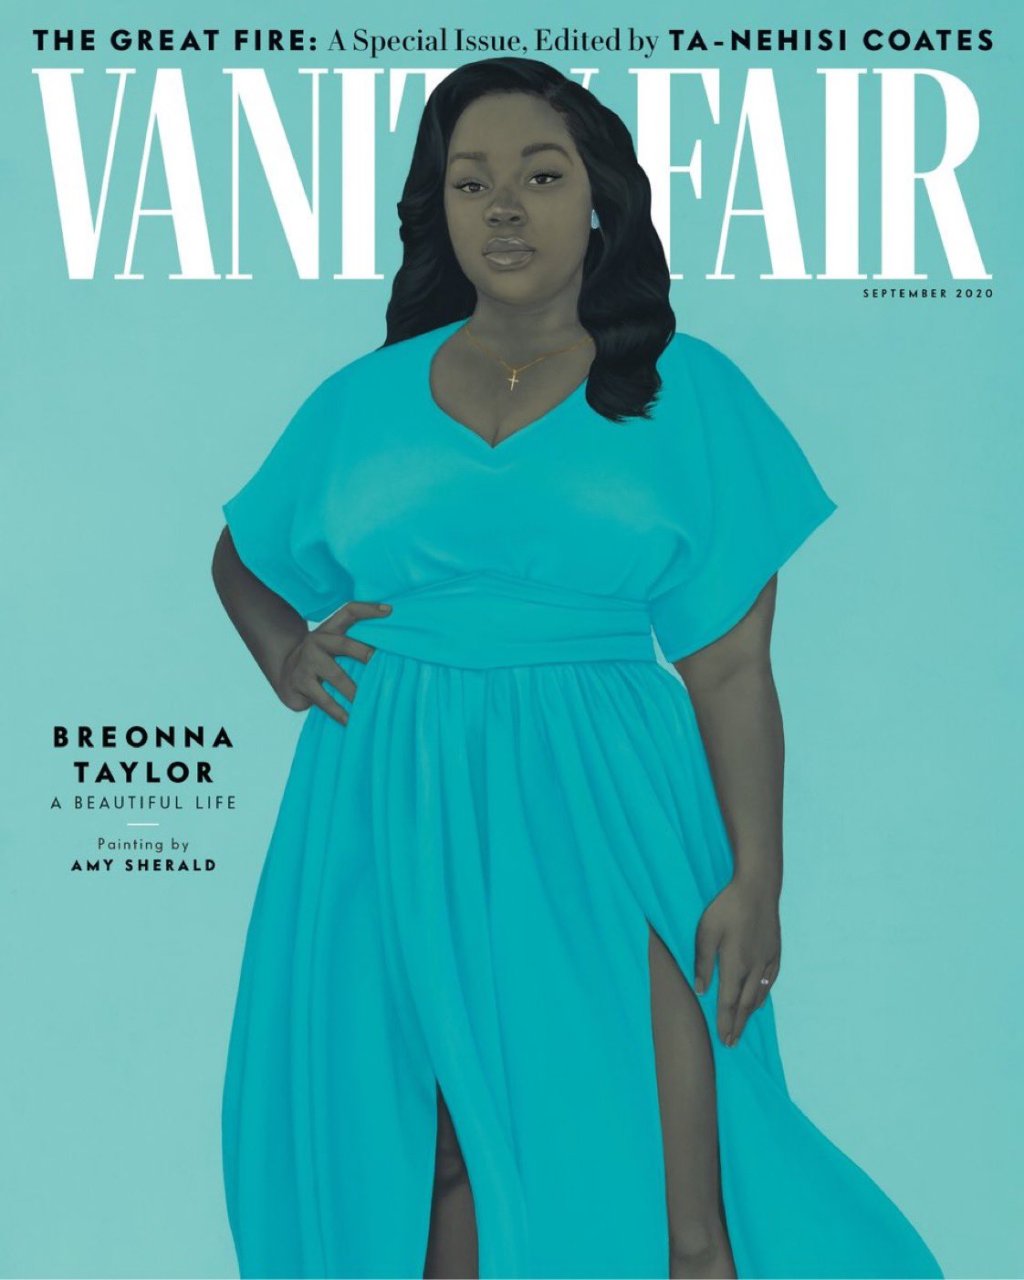 Amy Sherald’s Breonna Taylor Portrait Acquired by Smithsonian and Speed Art Museum